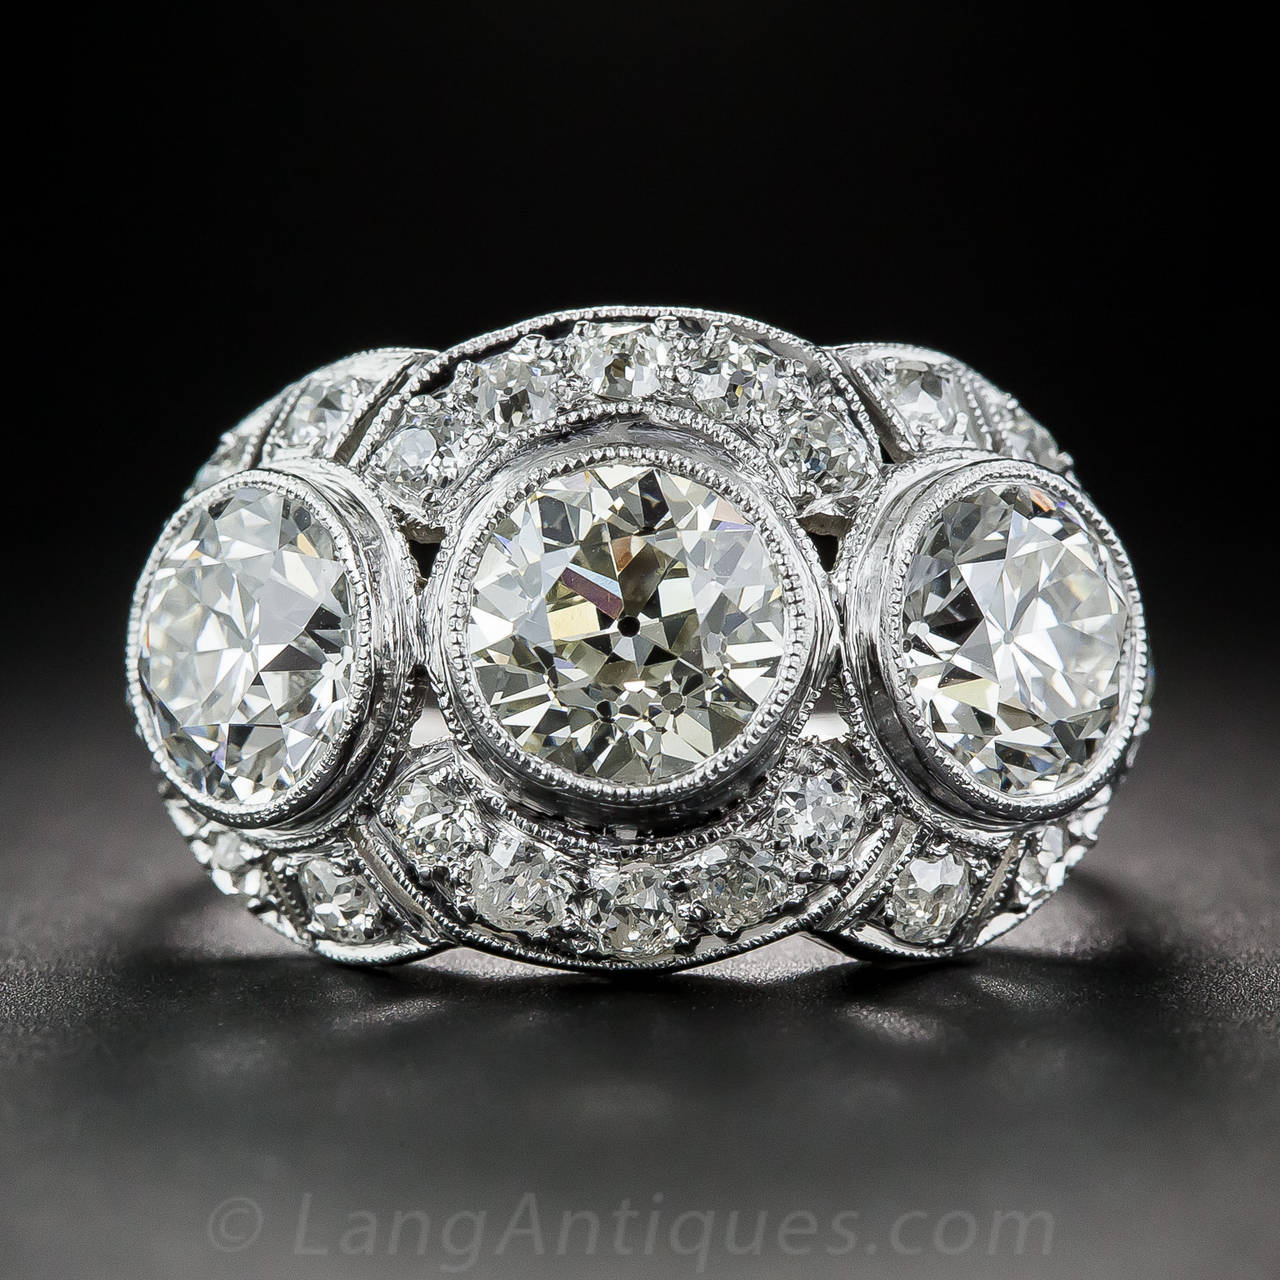 This spectacular 'wow!' ring wraps your finger with three bright-white and blazing European-cut diamonds totaling 3.65 carats. The tantalizing trio radiate from within slightly raised bezel settings, each of which is embraced by a partial circle of